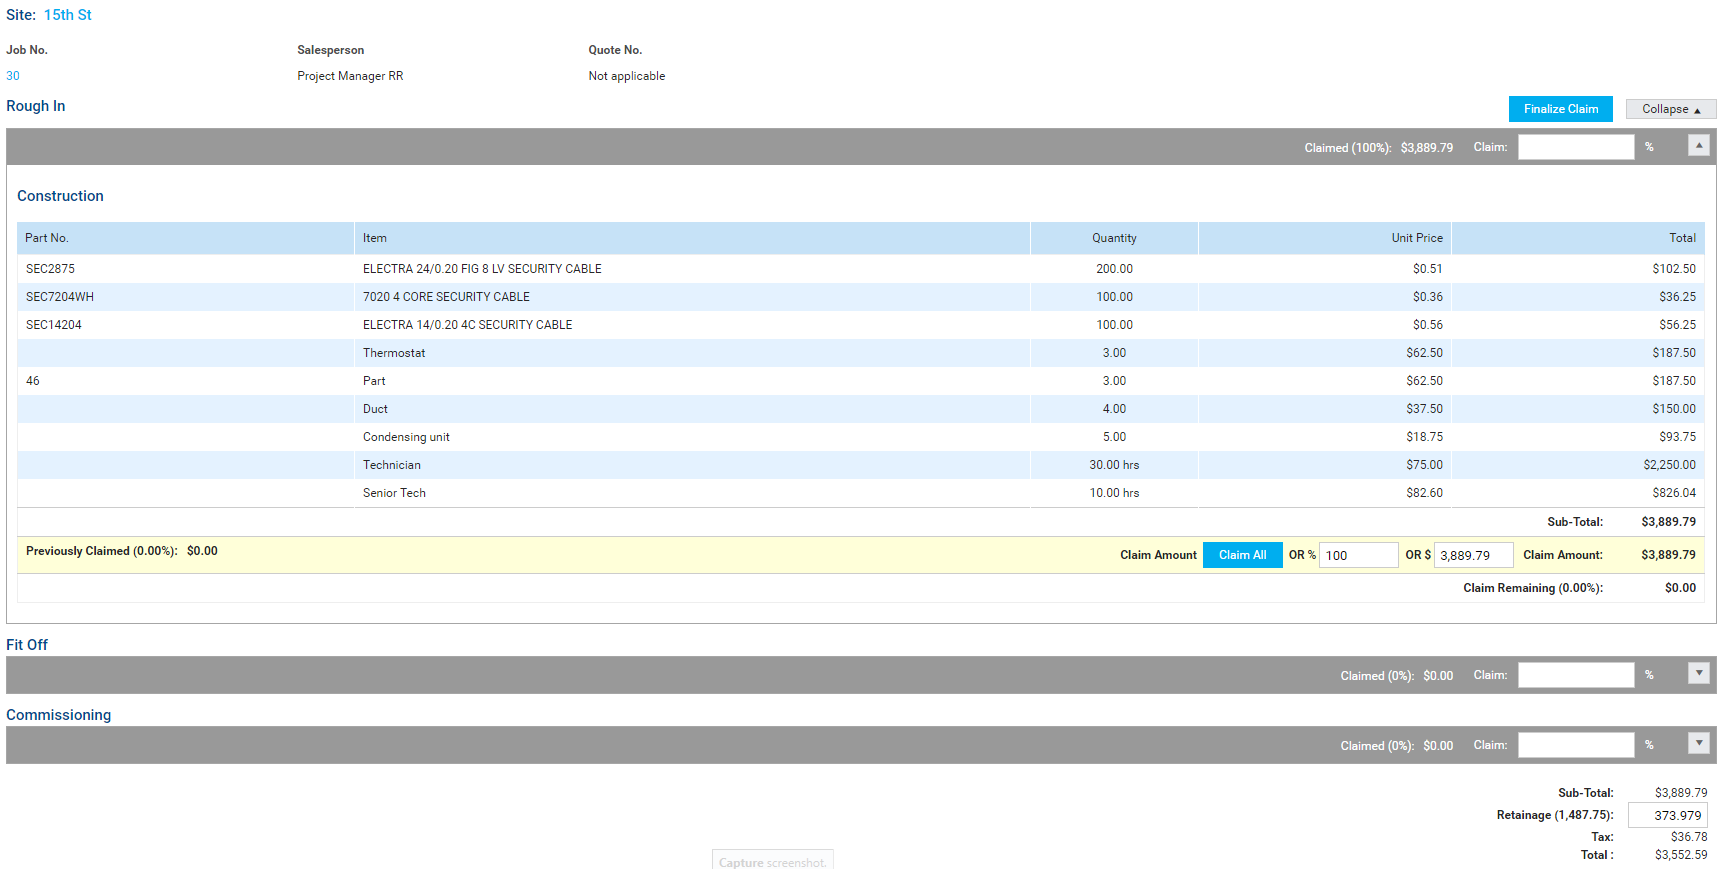 A screenshot of the manually calculated Retainage value for the request for claim.